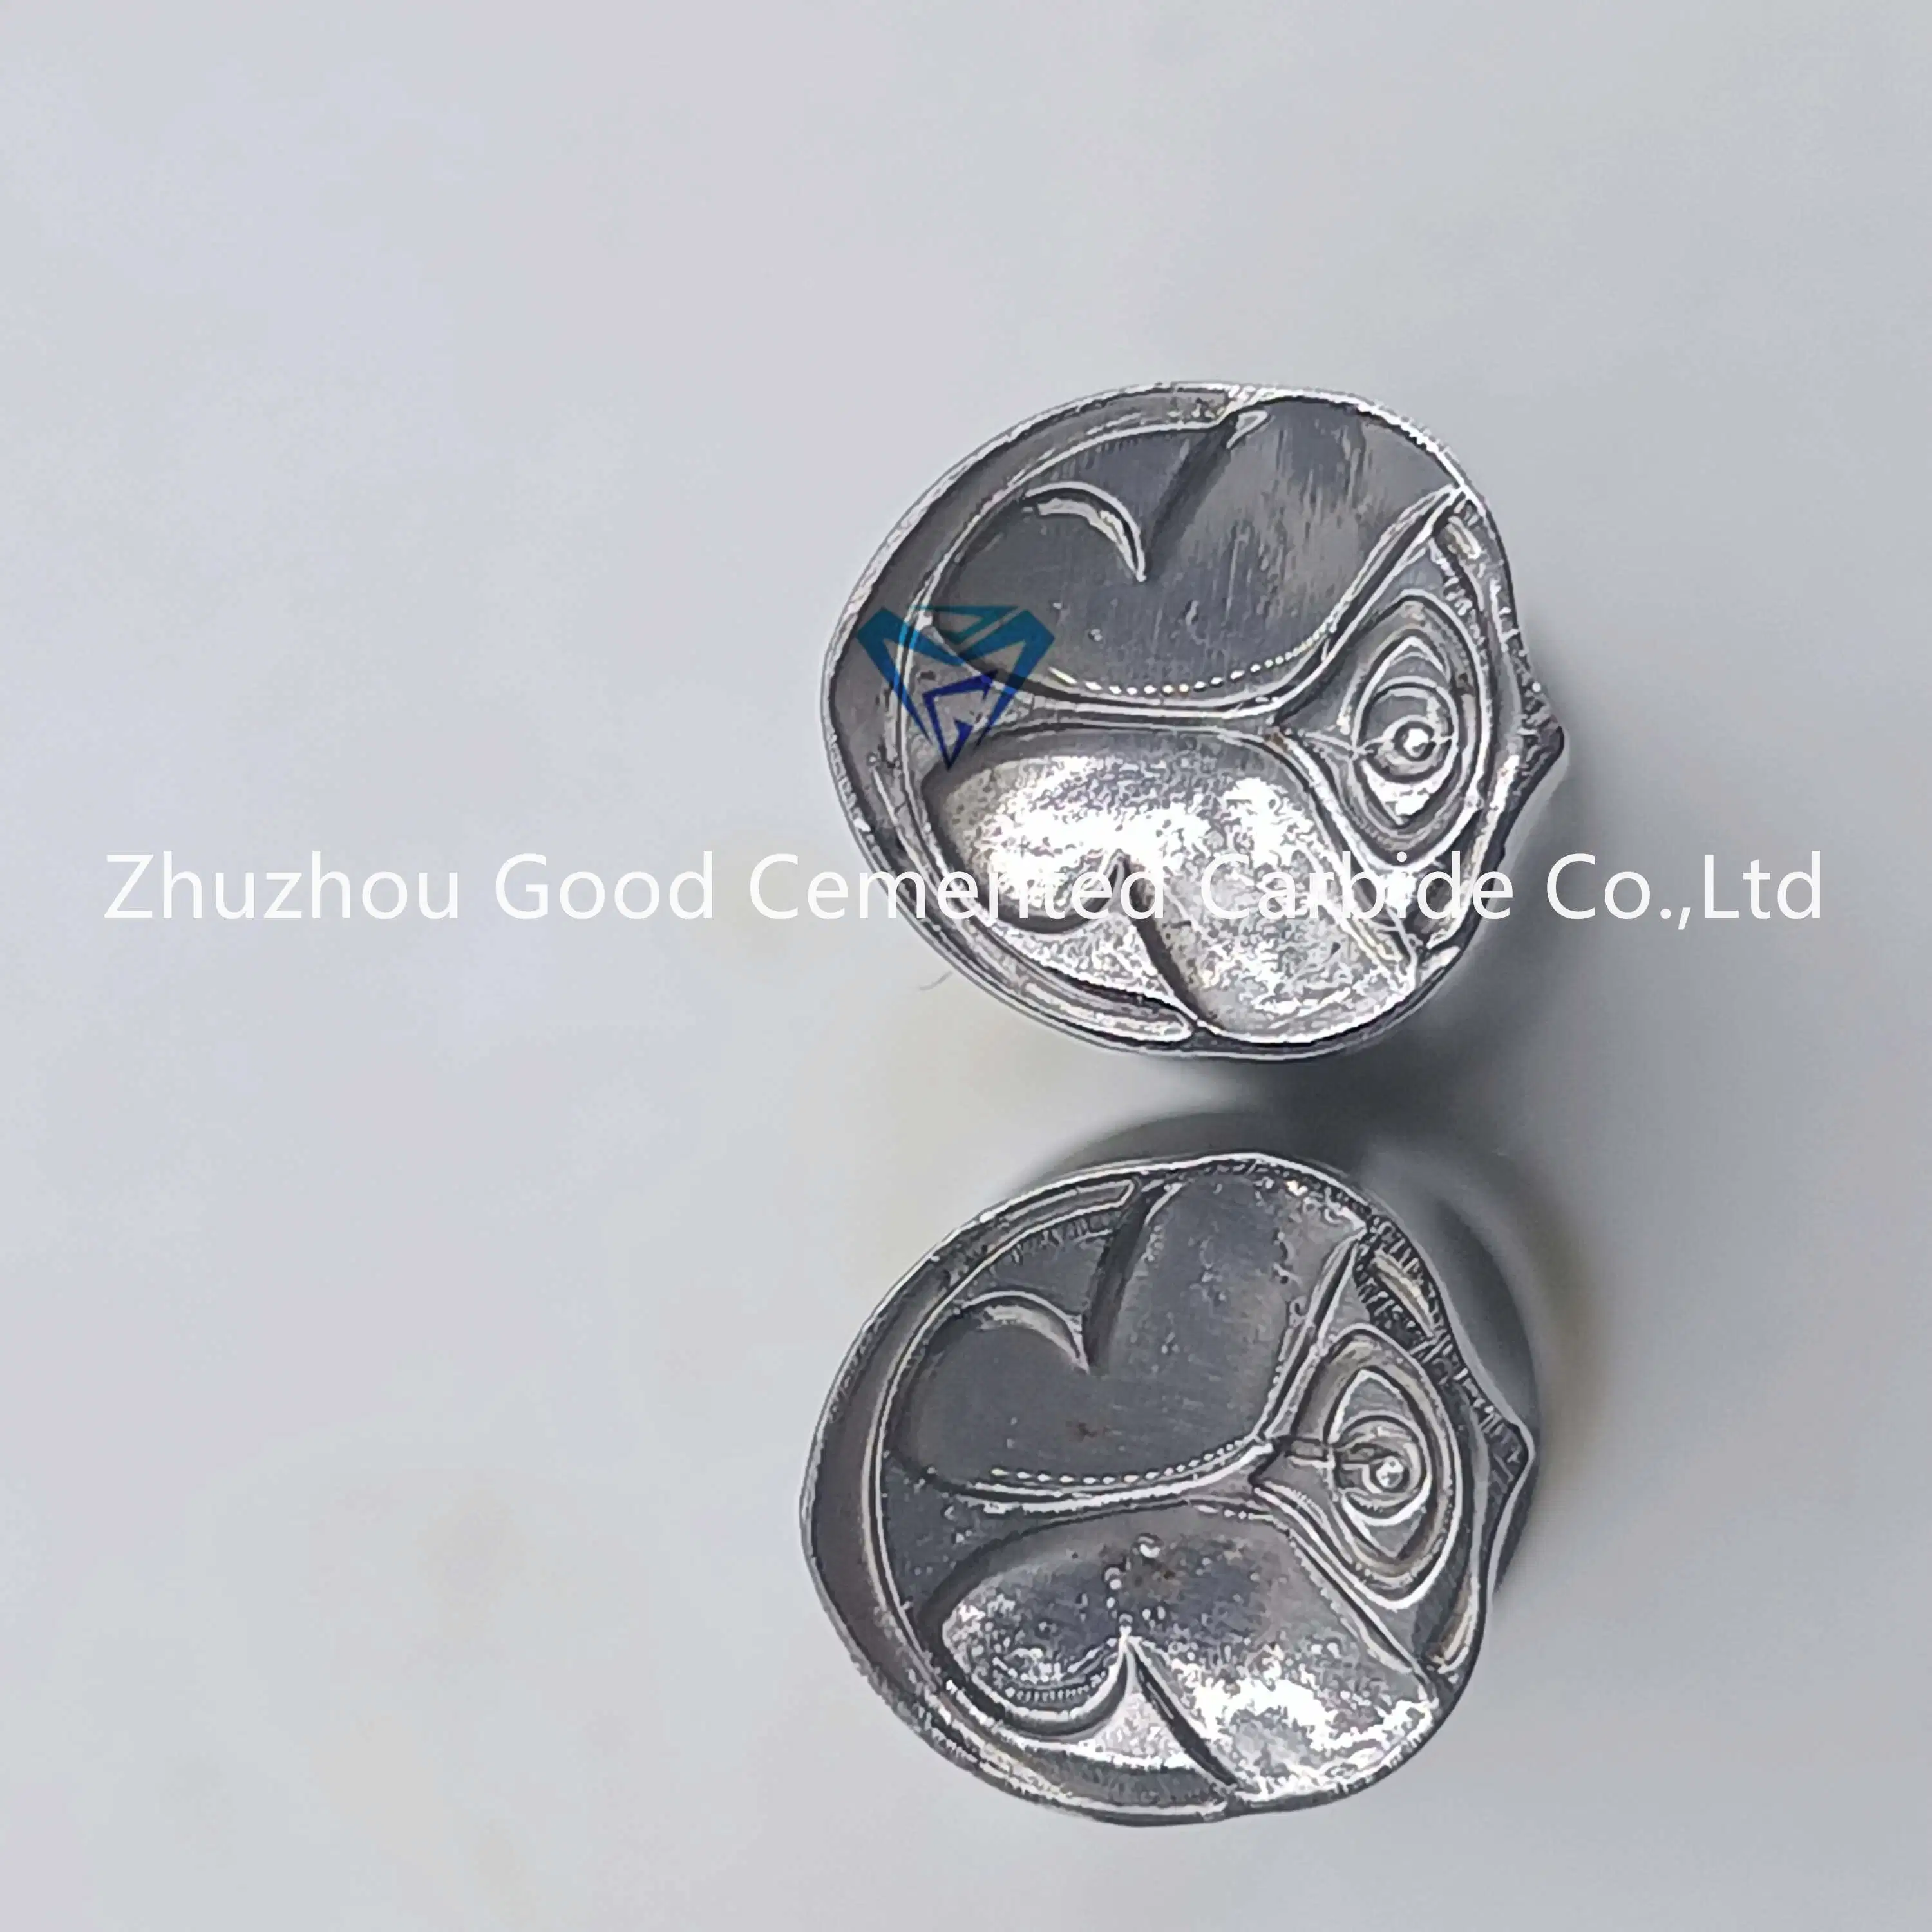 High quality/High cost performance 3D The Bomb Pattern Sugar Stamp Punch Die Tablet Press Die Set for Tdp0/ Tdp 1.5 or Tdp5 Tdp6 Molds Machine Moulds Stamp Dies